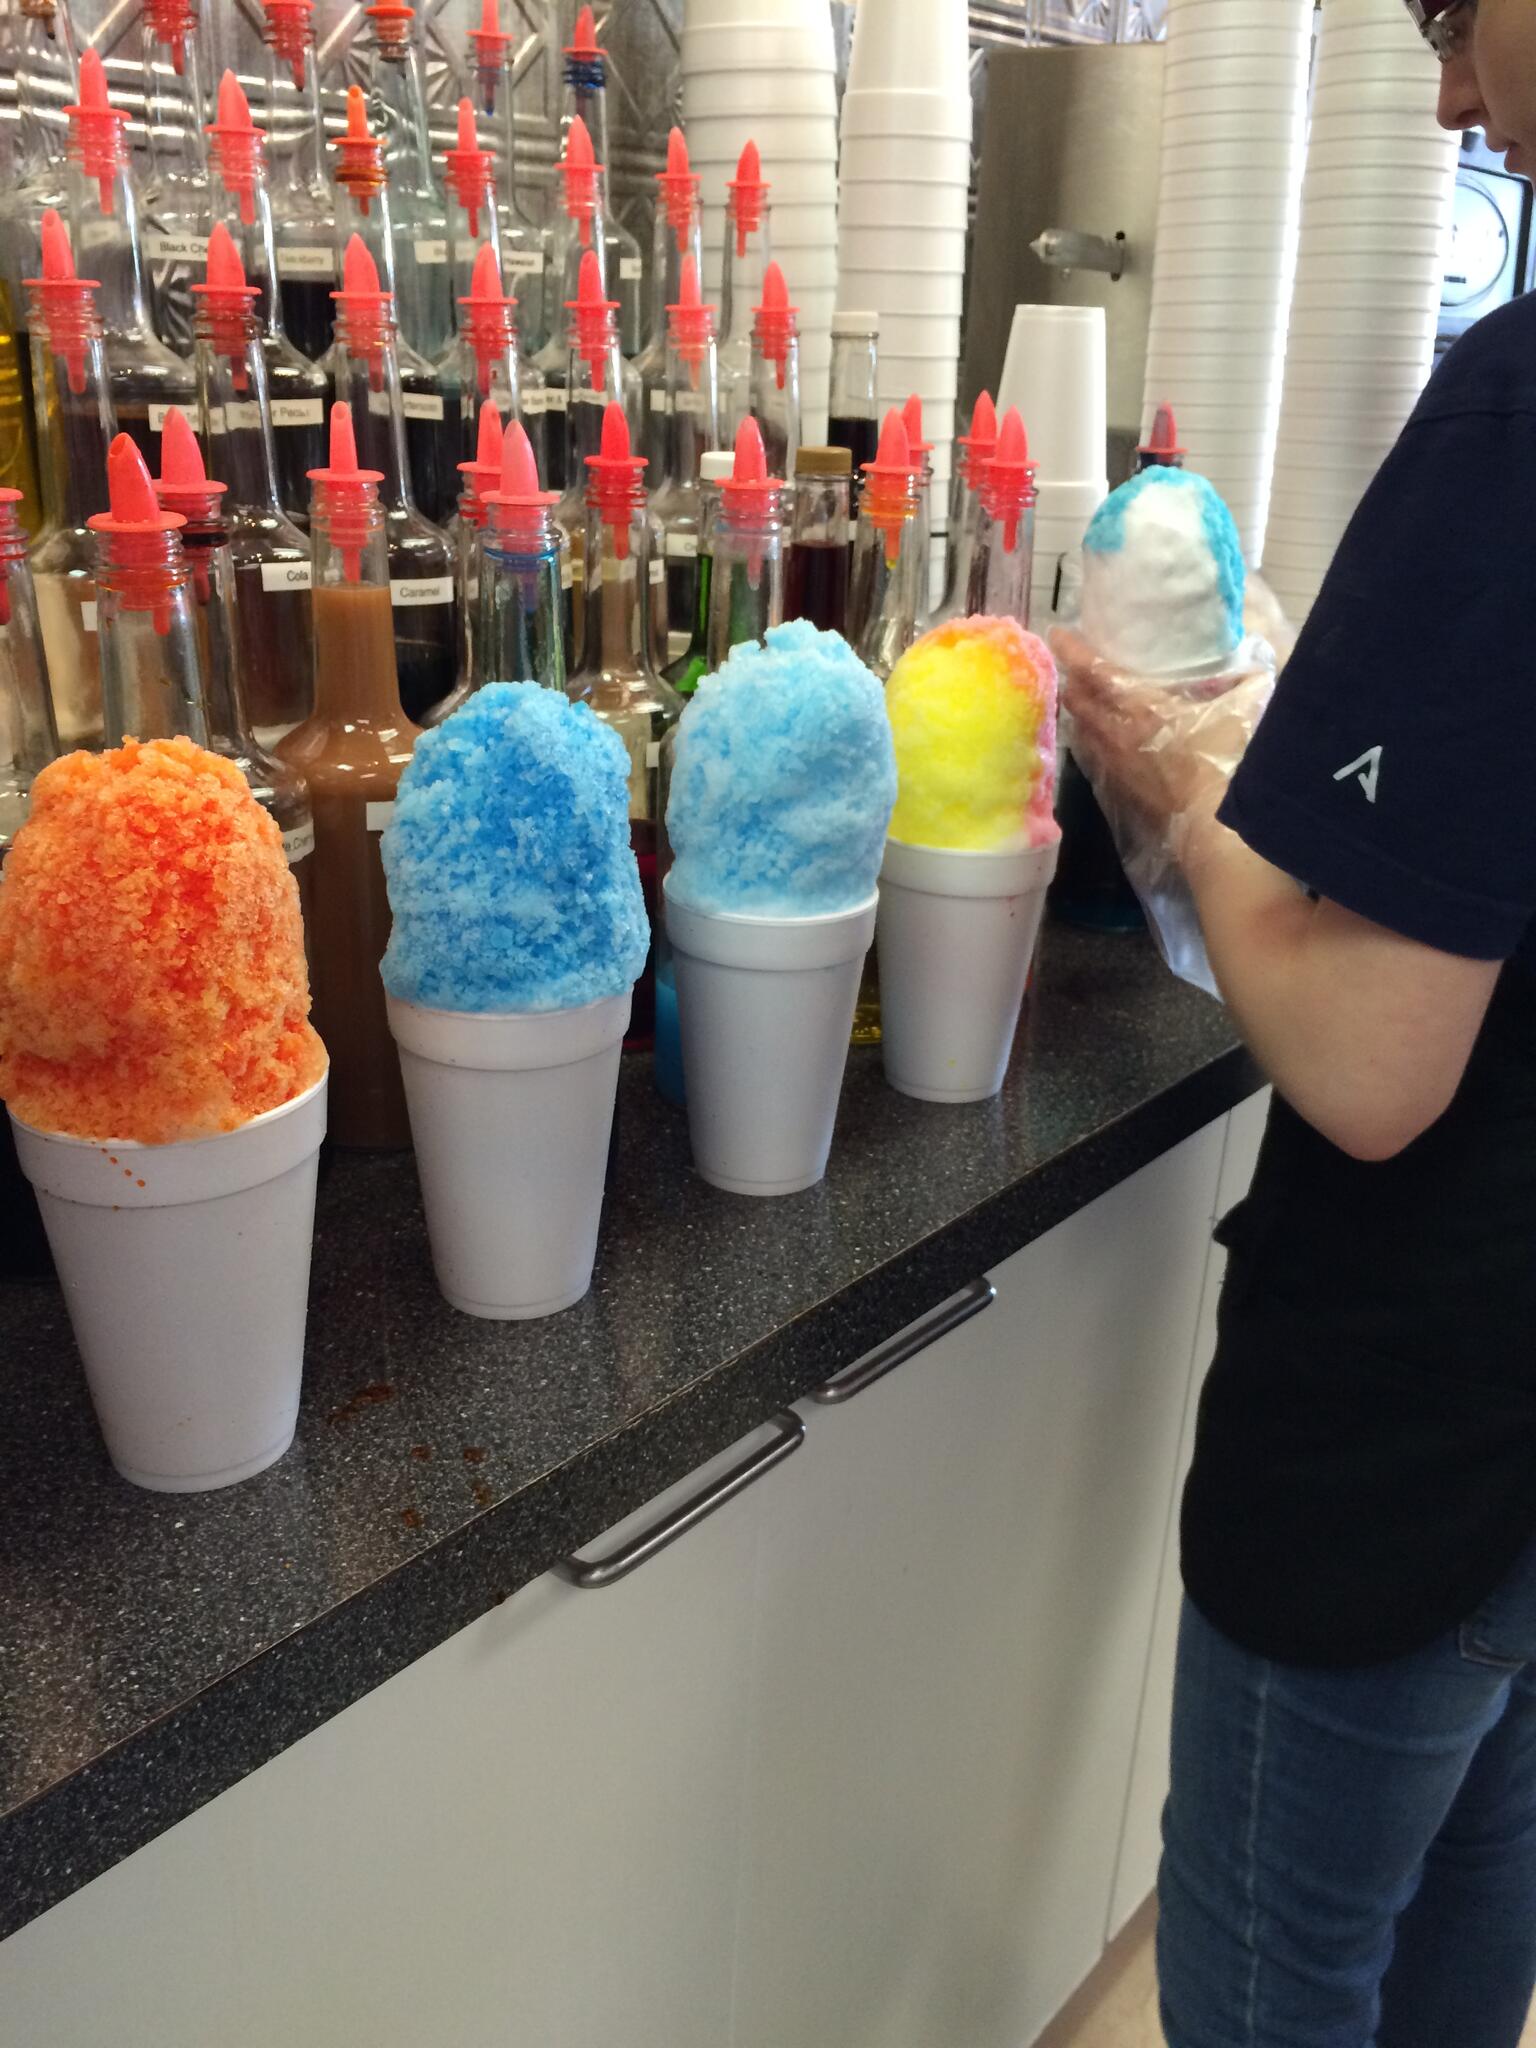 Snowcones & Shaved Ice in Houston (Minute Maid Park)